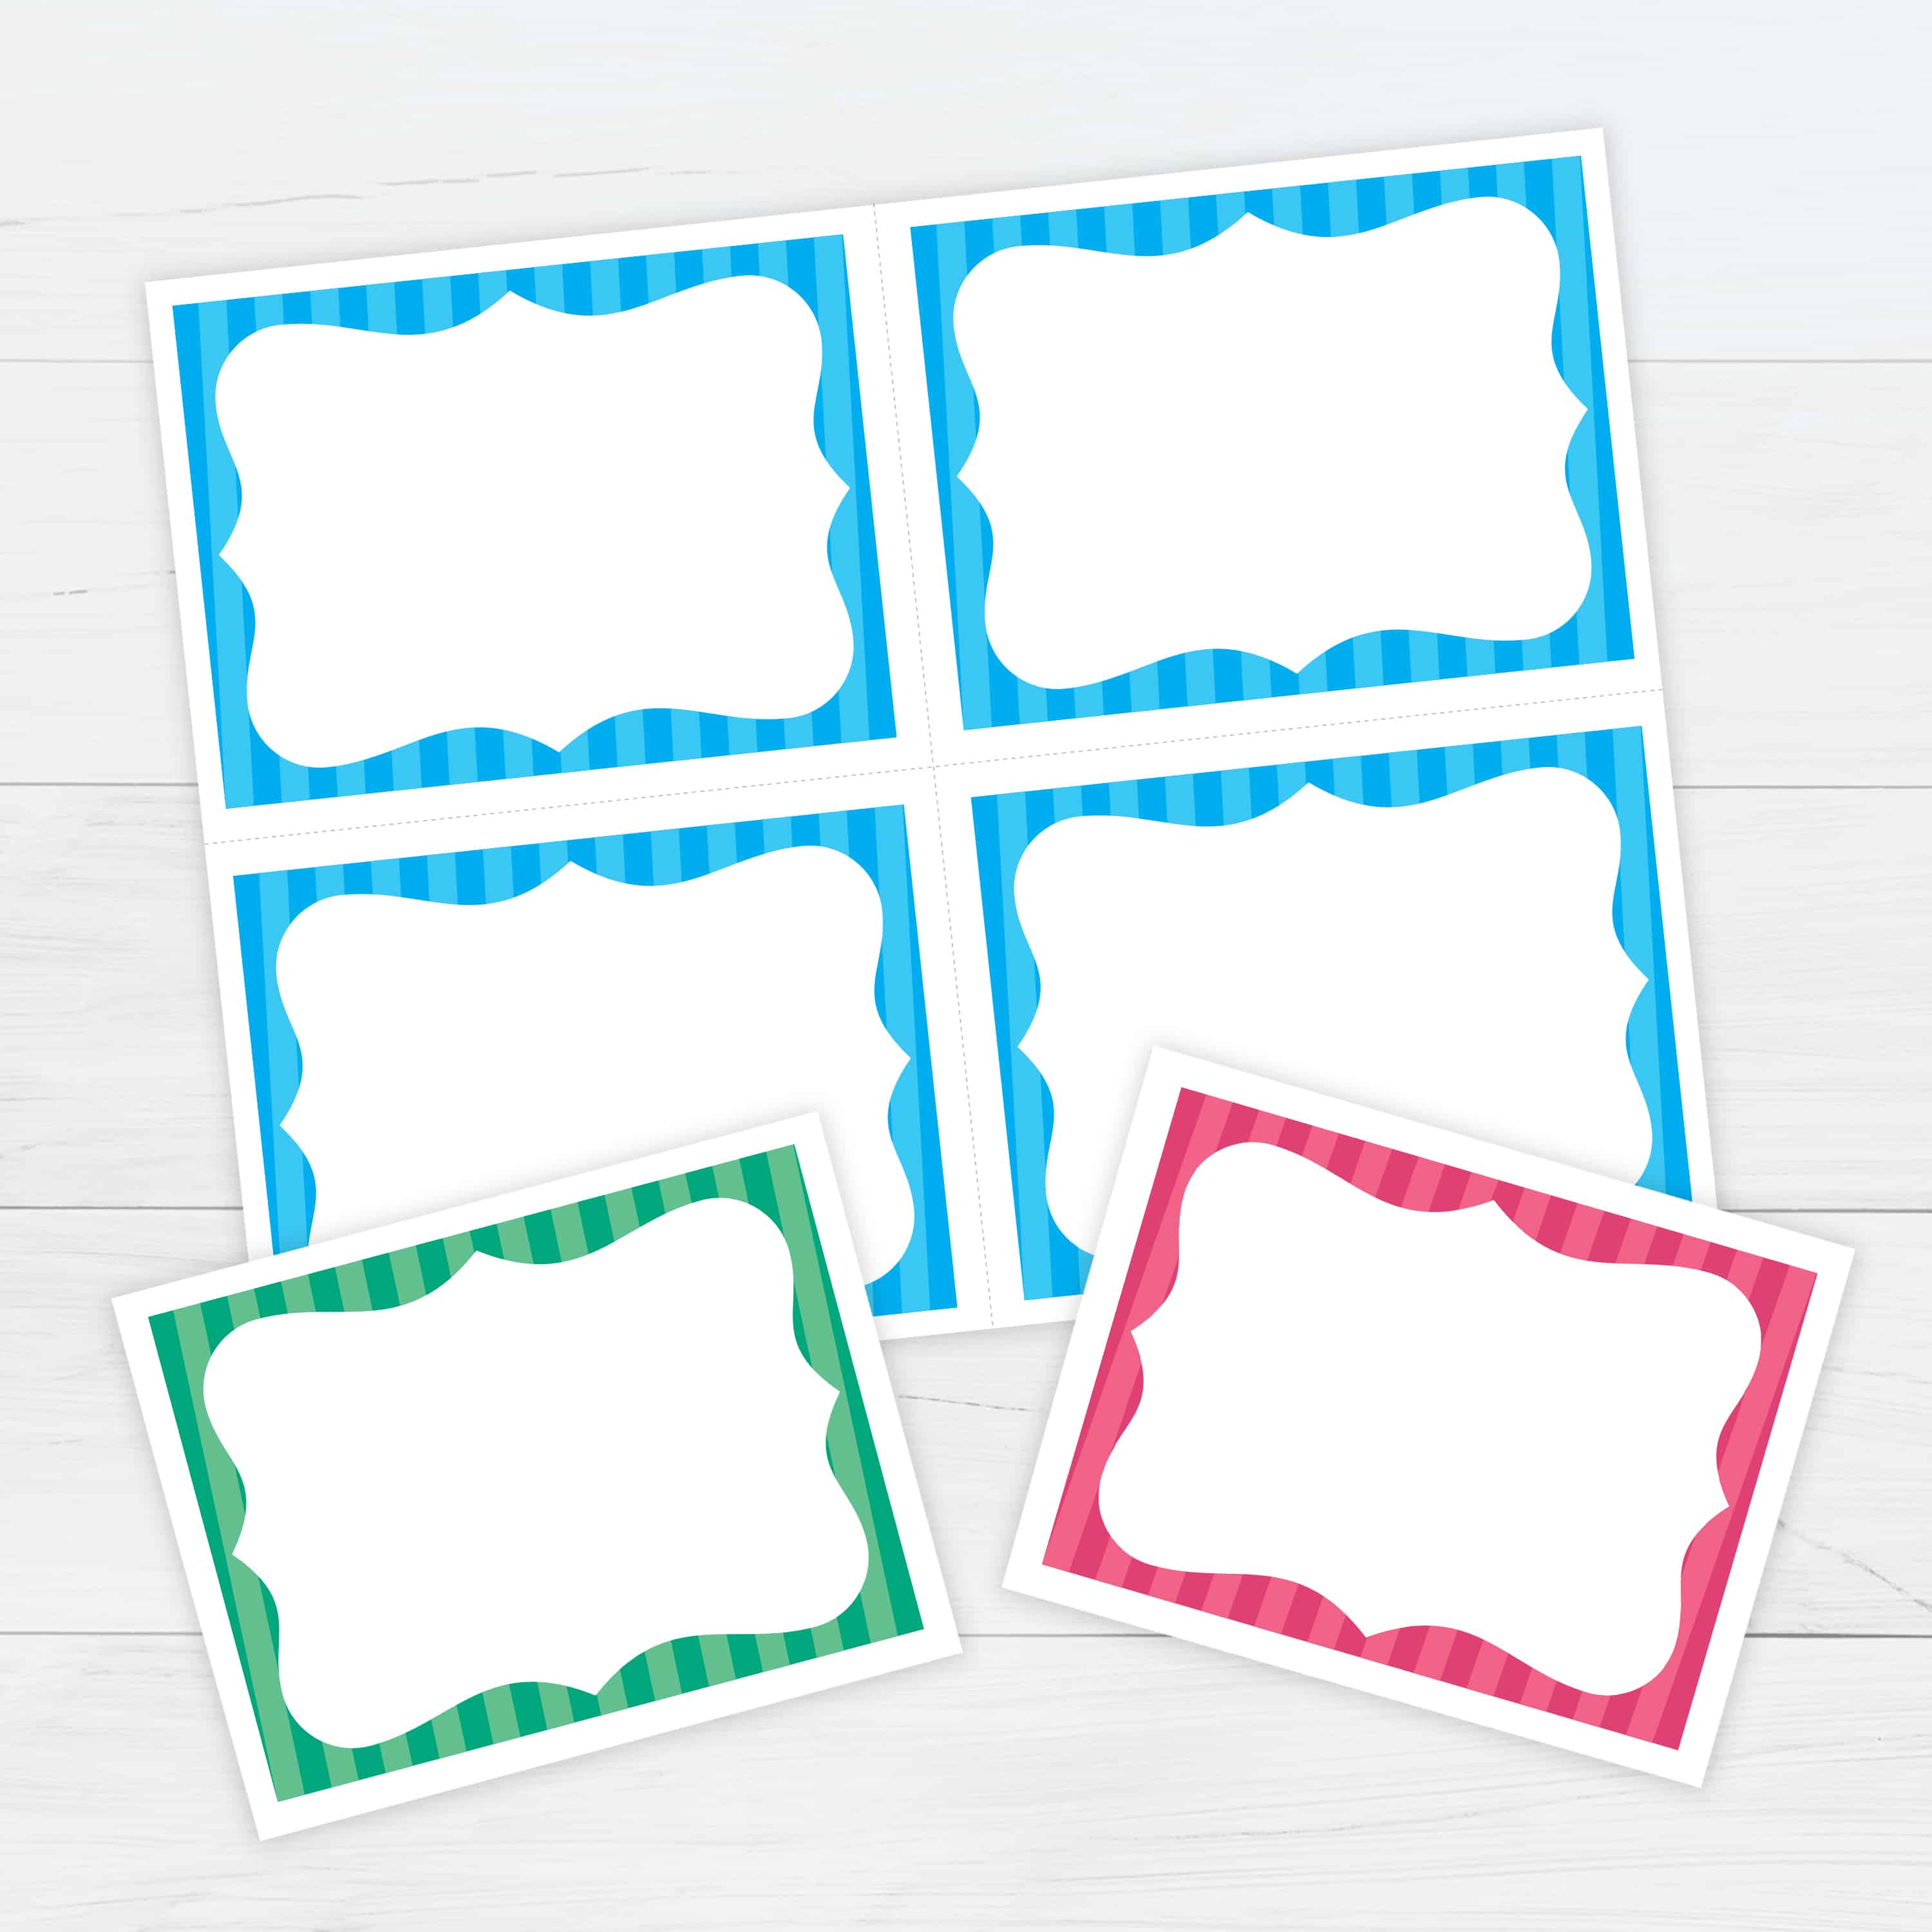 Bordered Flash cards Template 22 - Free Printable Download Within Free Printable Flash Cards Template